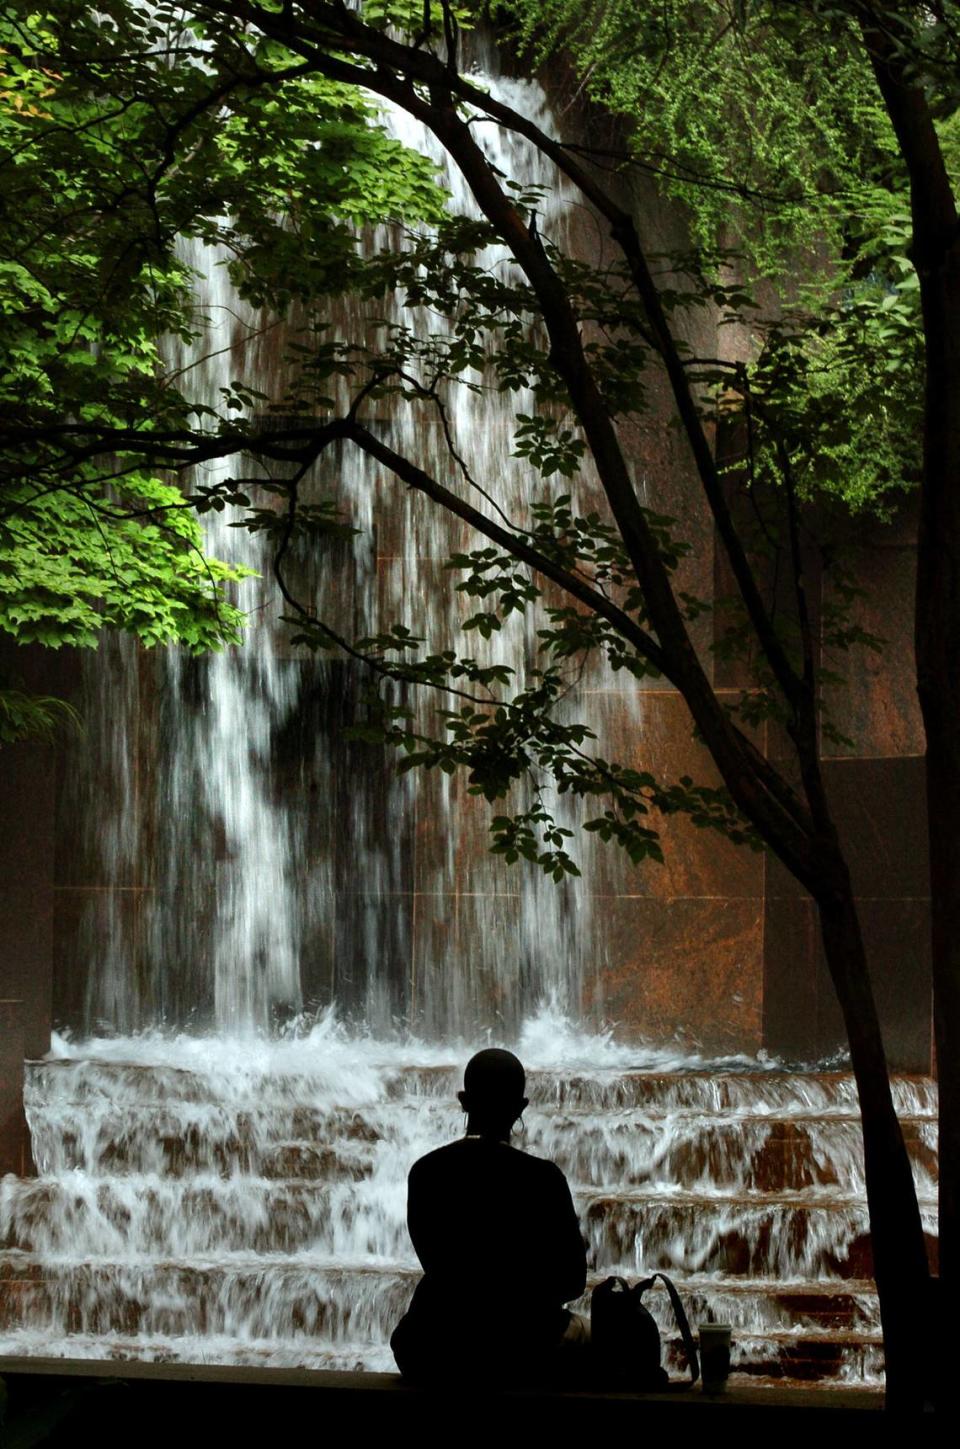 Cascading waters at Thomas Polk Park in 2004 offered a serene retreat for a lunch-time visitor in 2004.